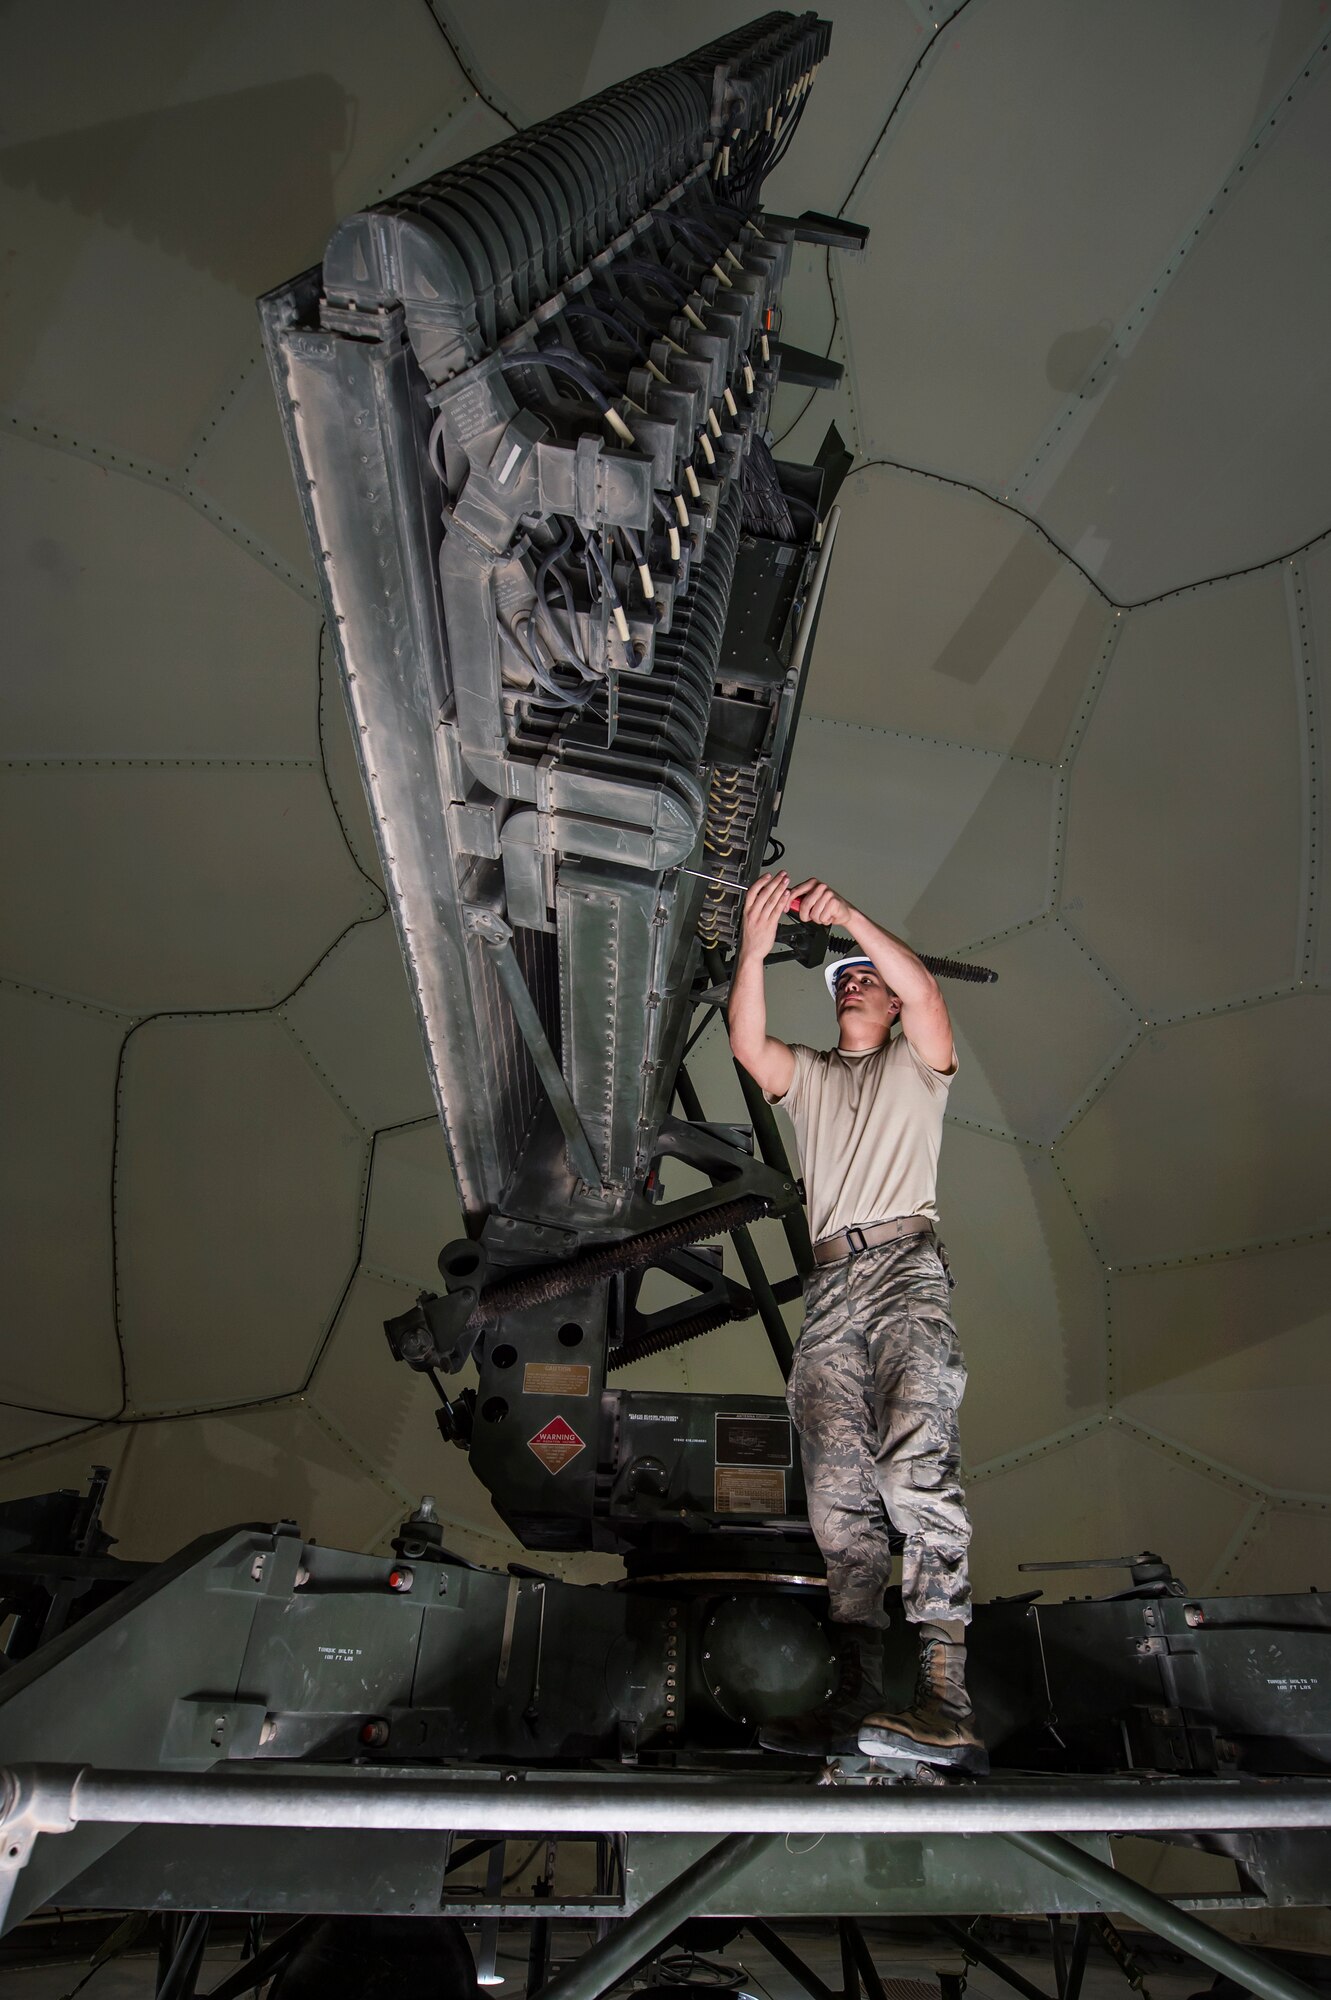 Senior Airman Collin Tully, 727th Expeditionary Air Control Squadron, Detachment 3 radar maintainer, conducts routine maintenance on a transportable radar system (TPS-75) Jan. 14, 2019, at Al Udeid Air Base, Qatar. The 727th EACS consists of a team of 23 Airmen from seven different Air Force Specialty Codes. Together, they ensure TPS-75 radar systems are prepared to identify any aircraft within a 240 nautical mile range of Al Udeid. (U.S. Air Force Tech. Sgt. Christopher Hubenthal)